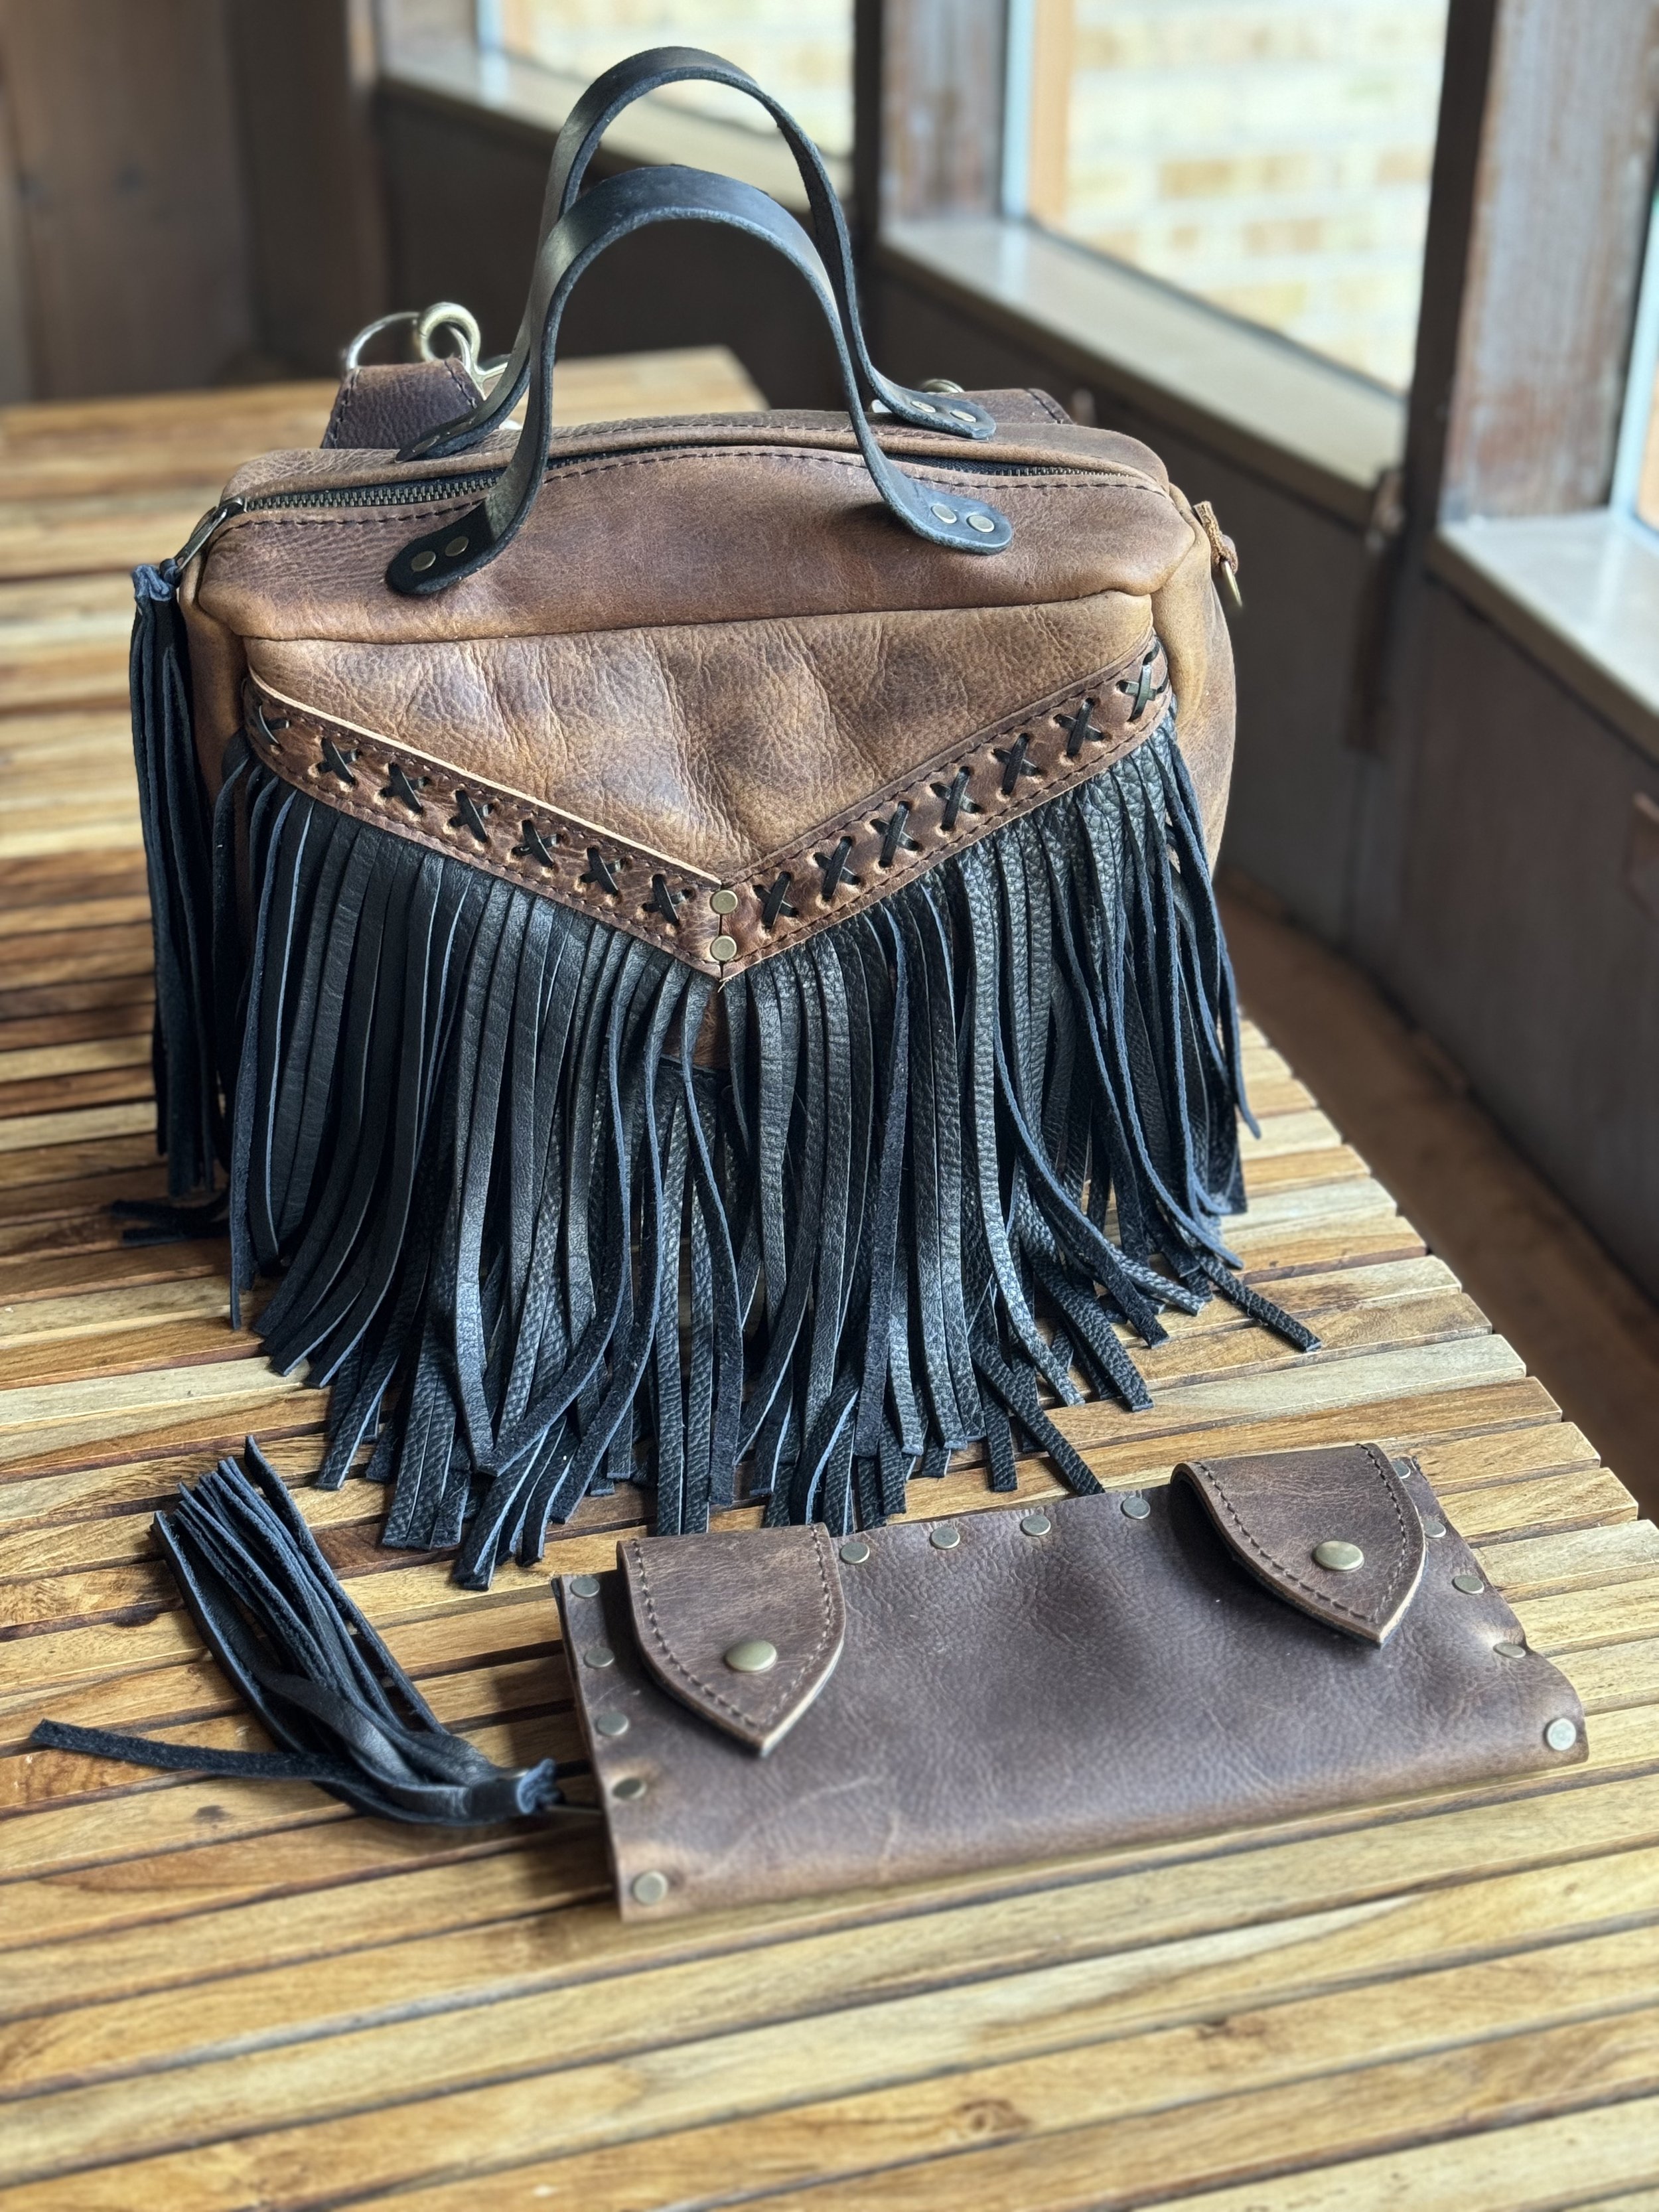 Custom requested leather with Black Lace X Stitch, Black bison fringe leather, 2 simple leather handles, Flair D Ring, Antique brass hardware - Mini Melissa Convertible Bag and Large Wallet set